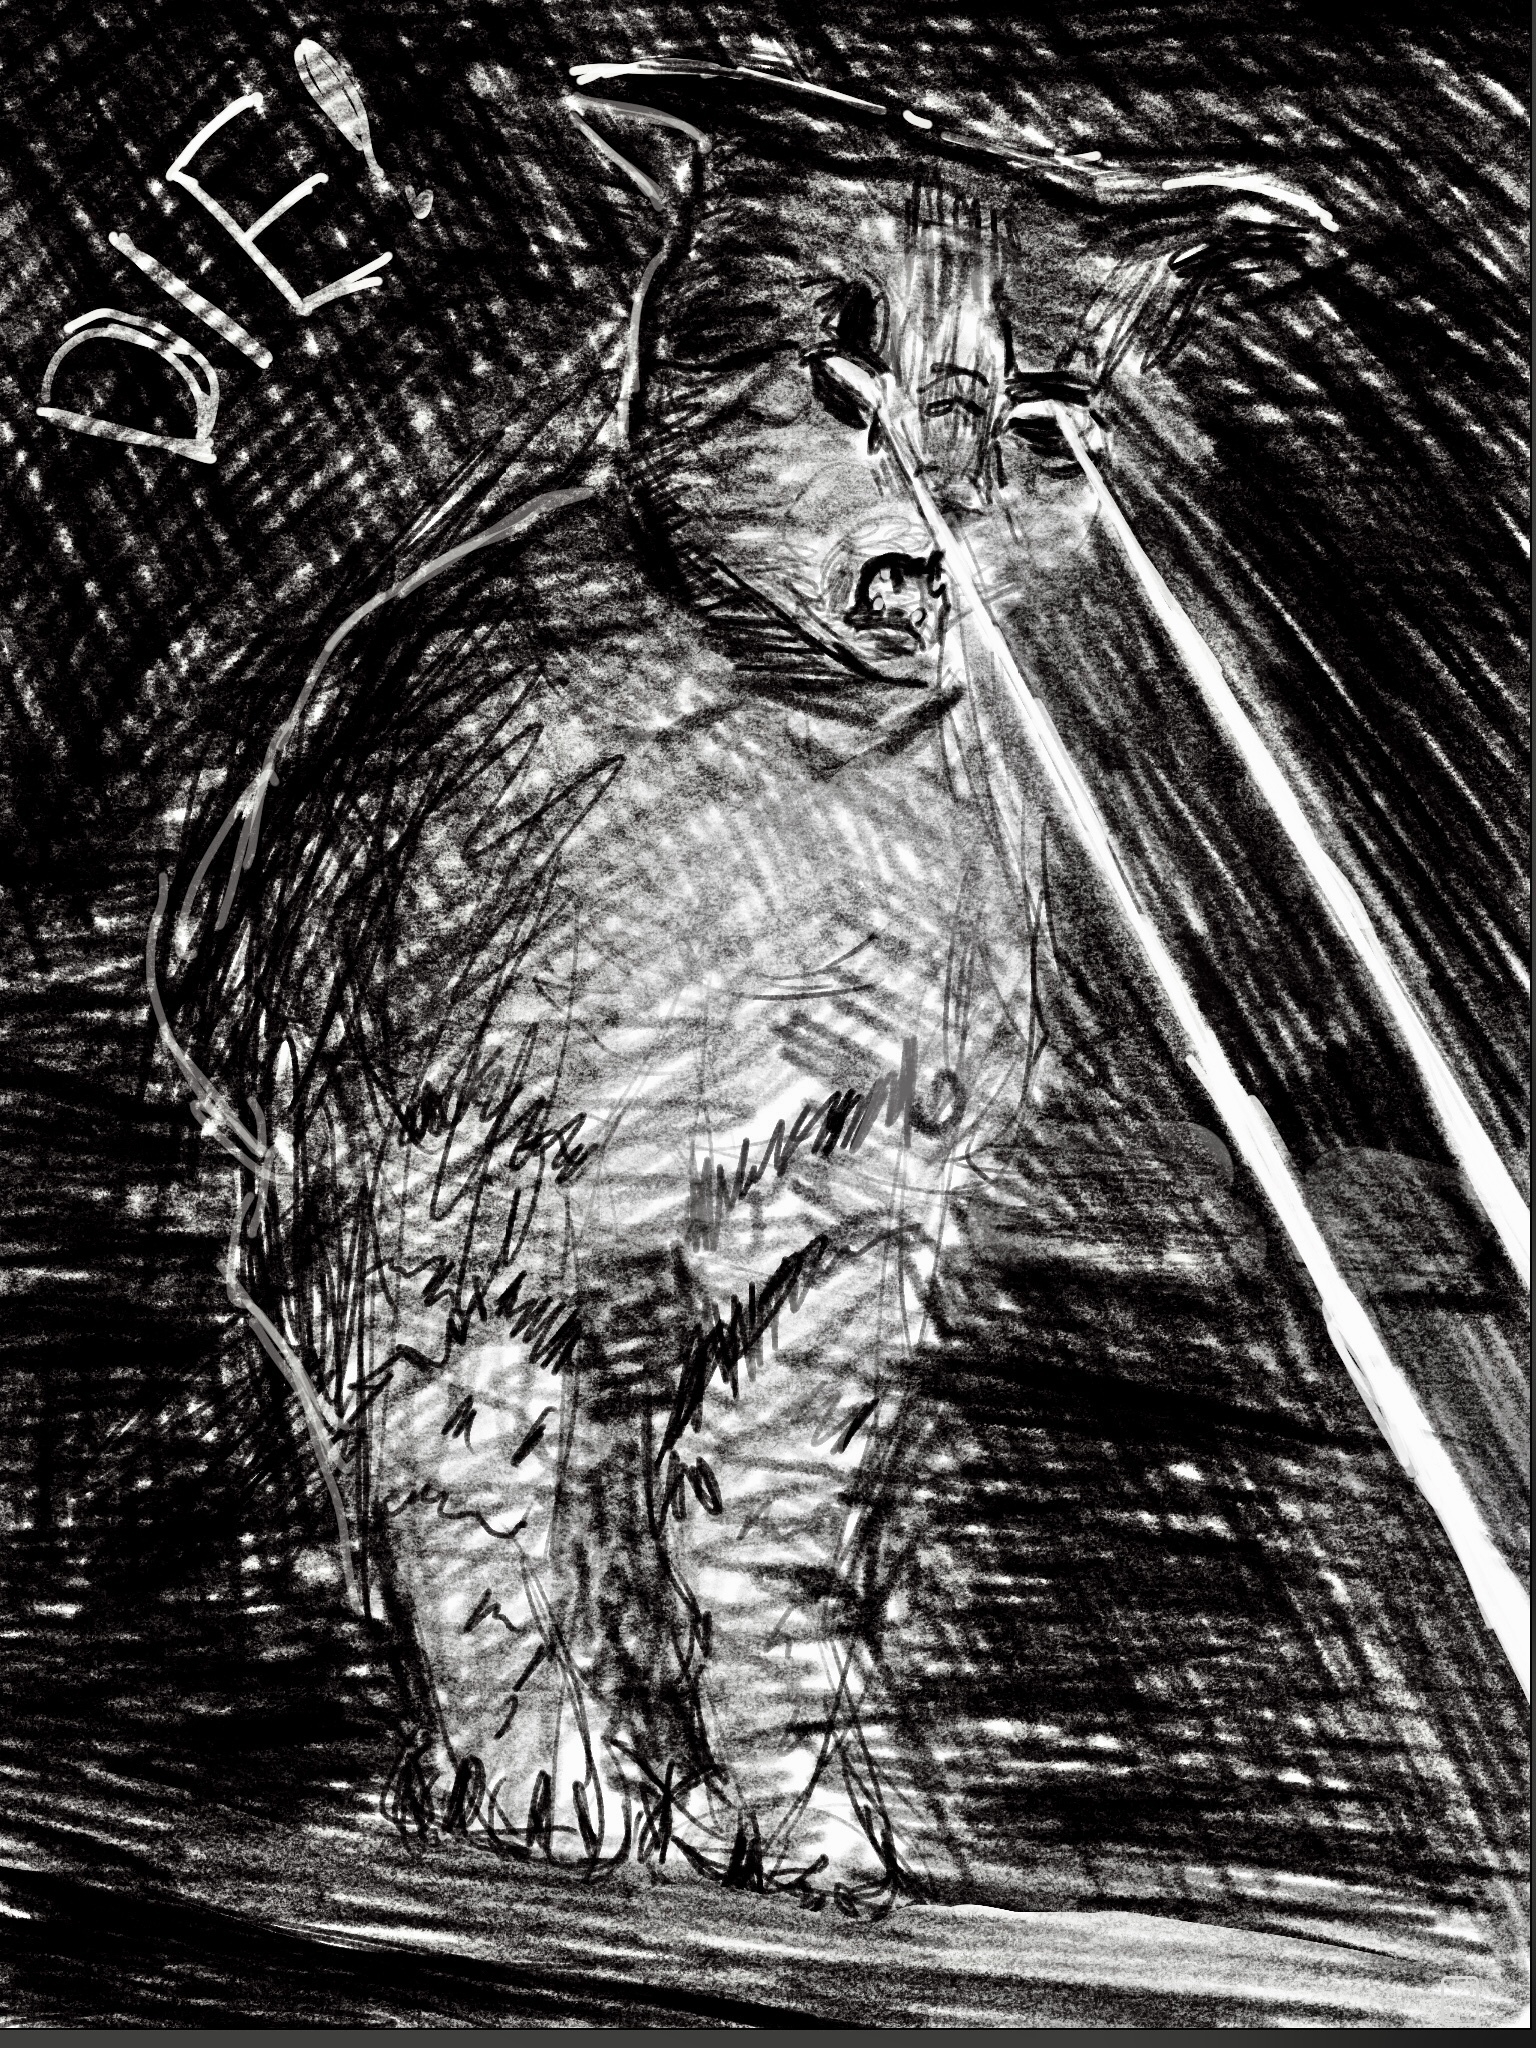 digital pencil sketch of an angry cat shooting lasers out of its eyes while sitting on a staircase.